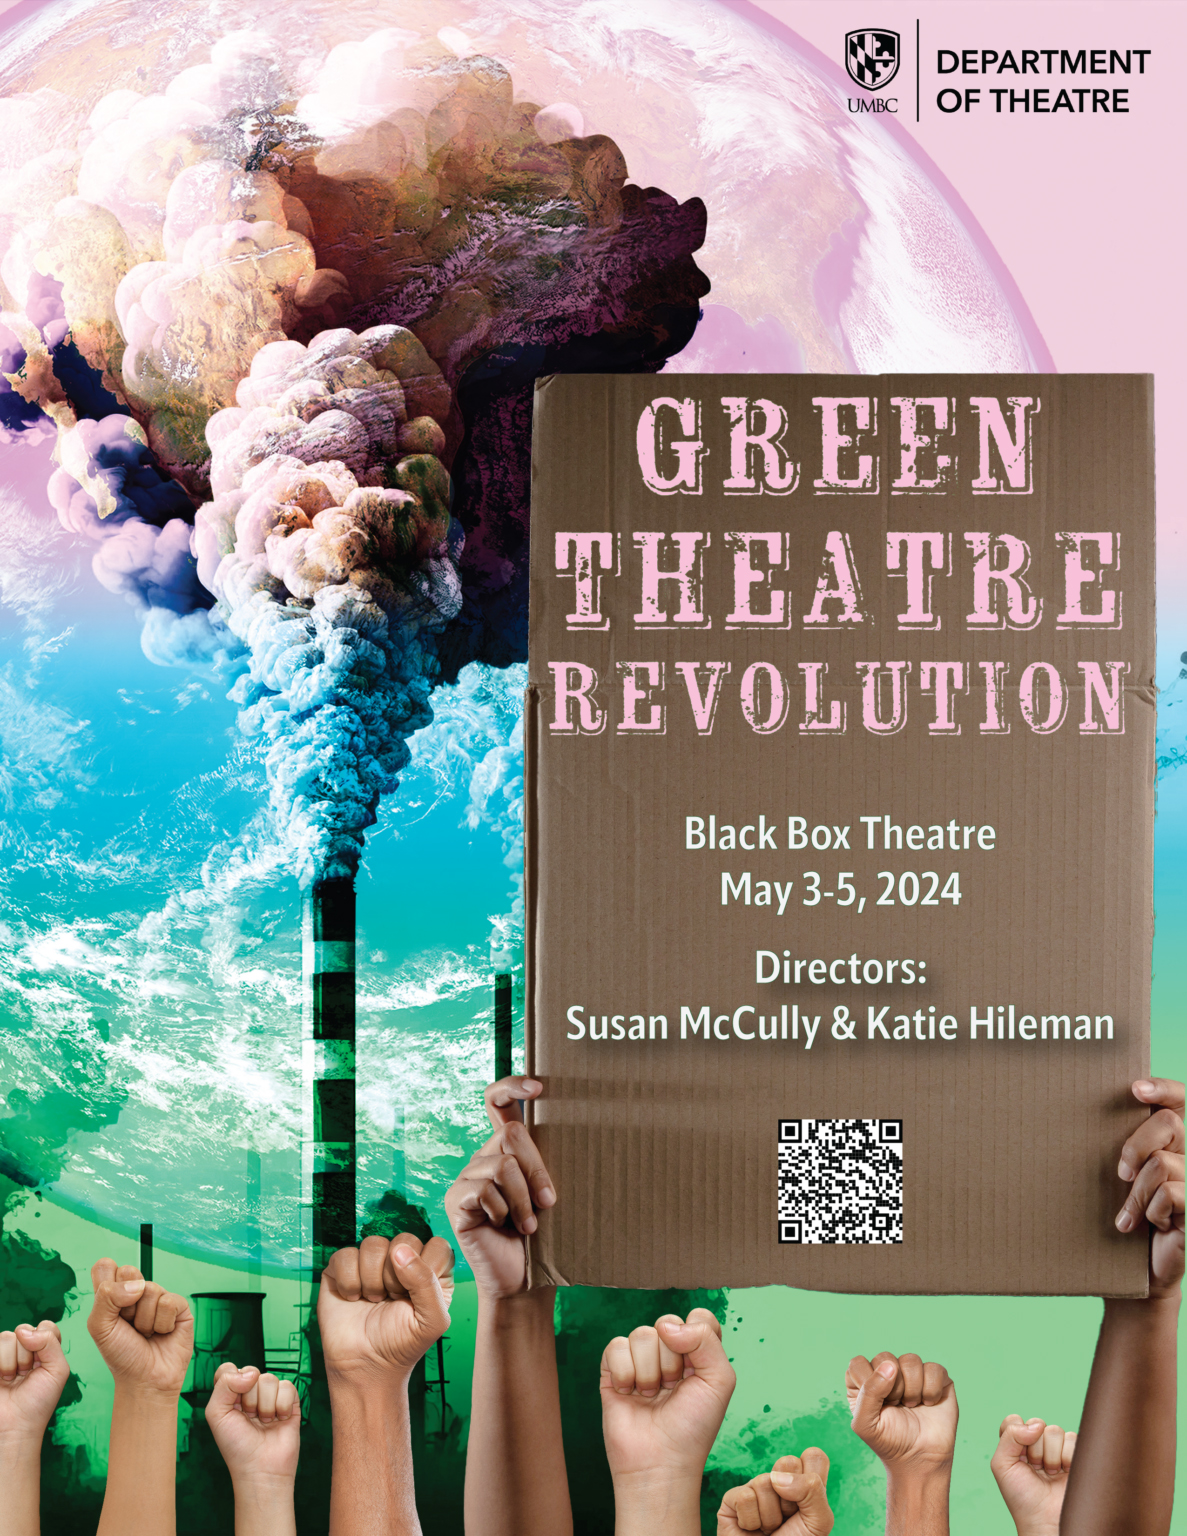 A promotional poster says Green Theatre Revolution